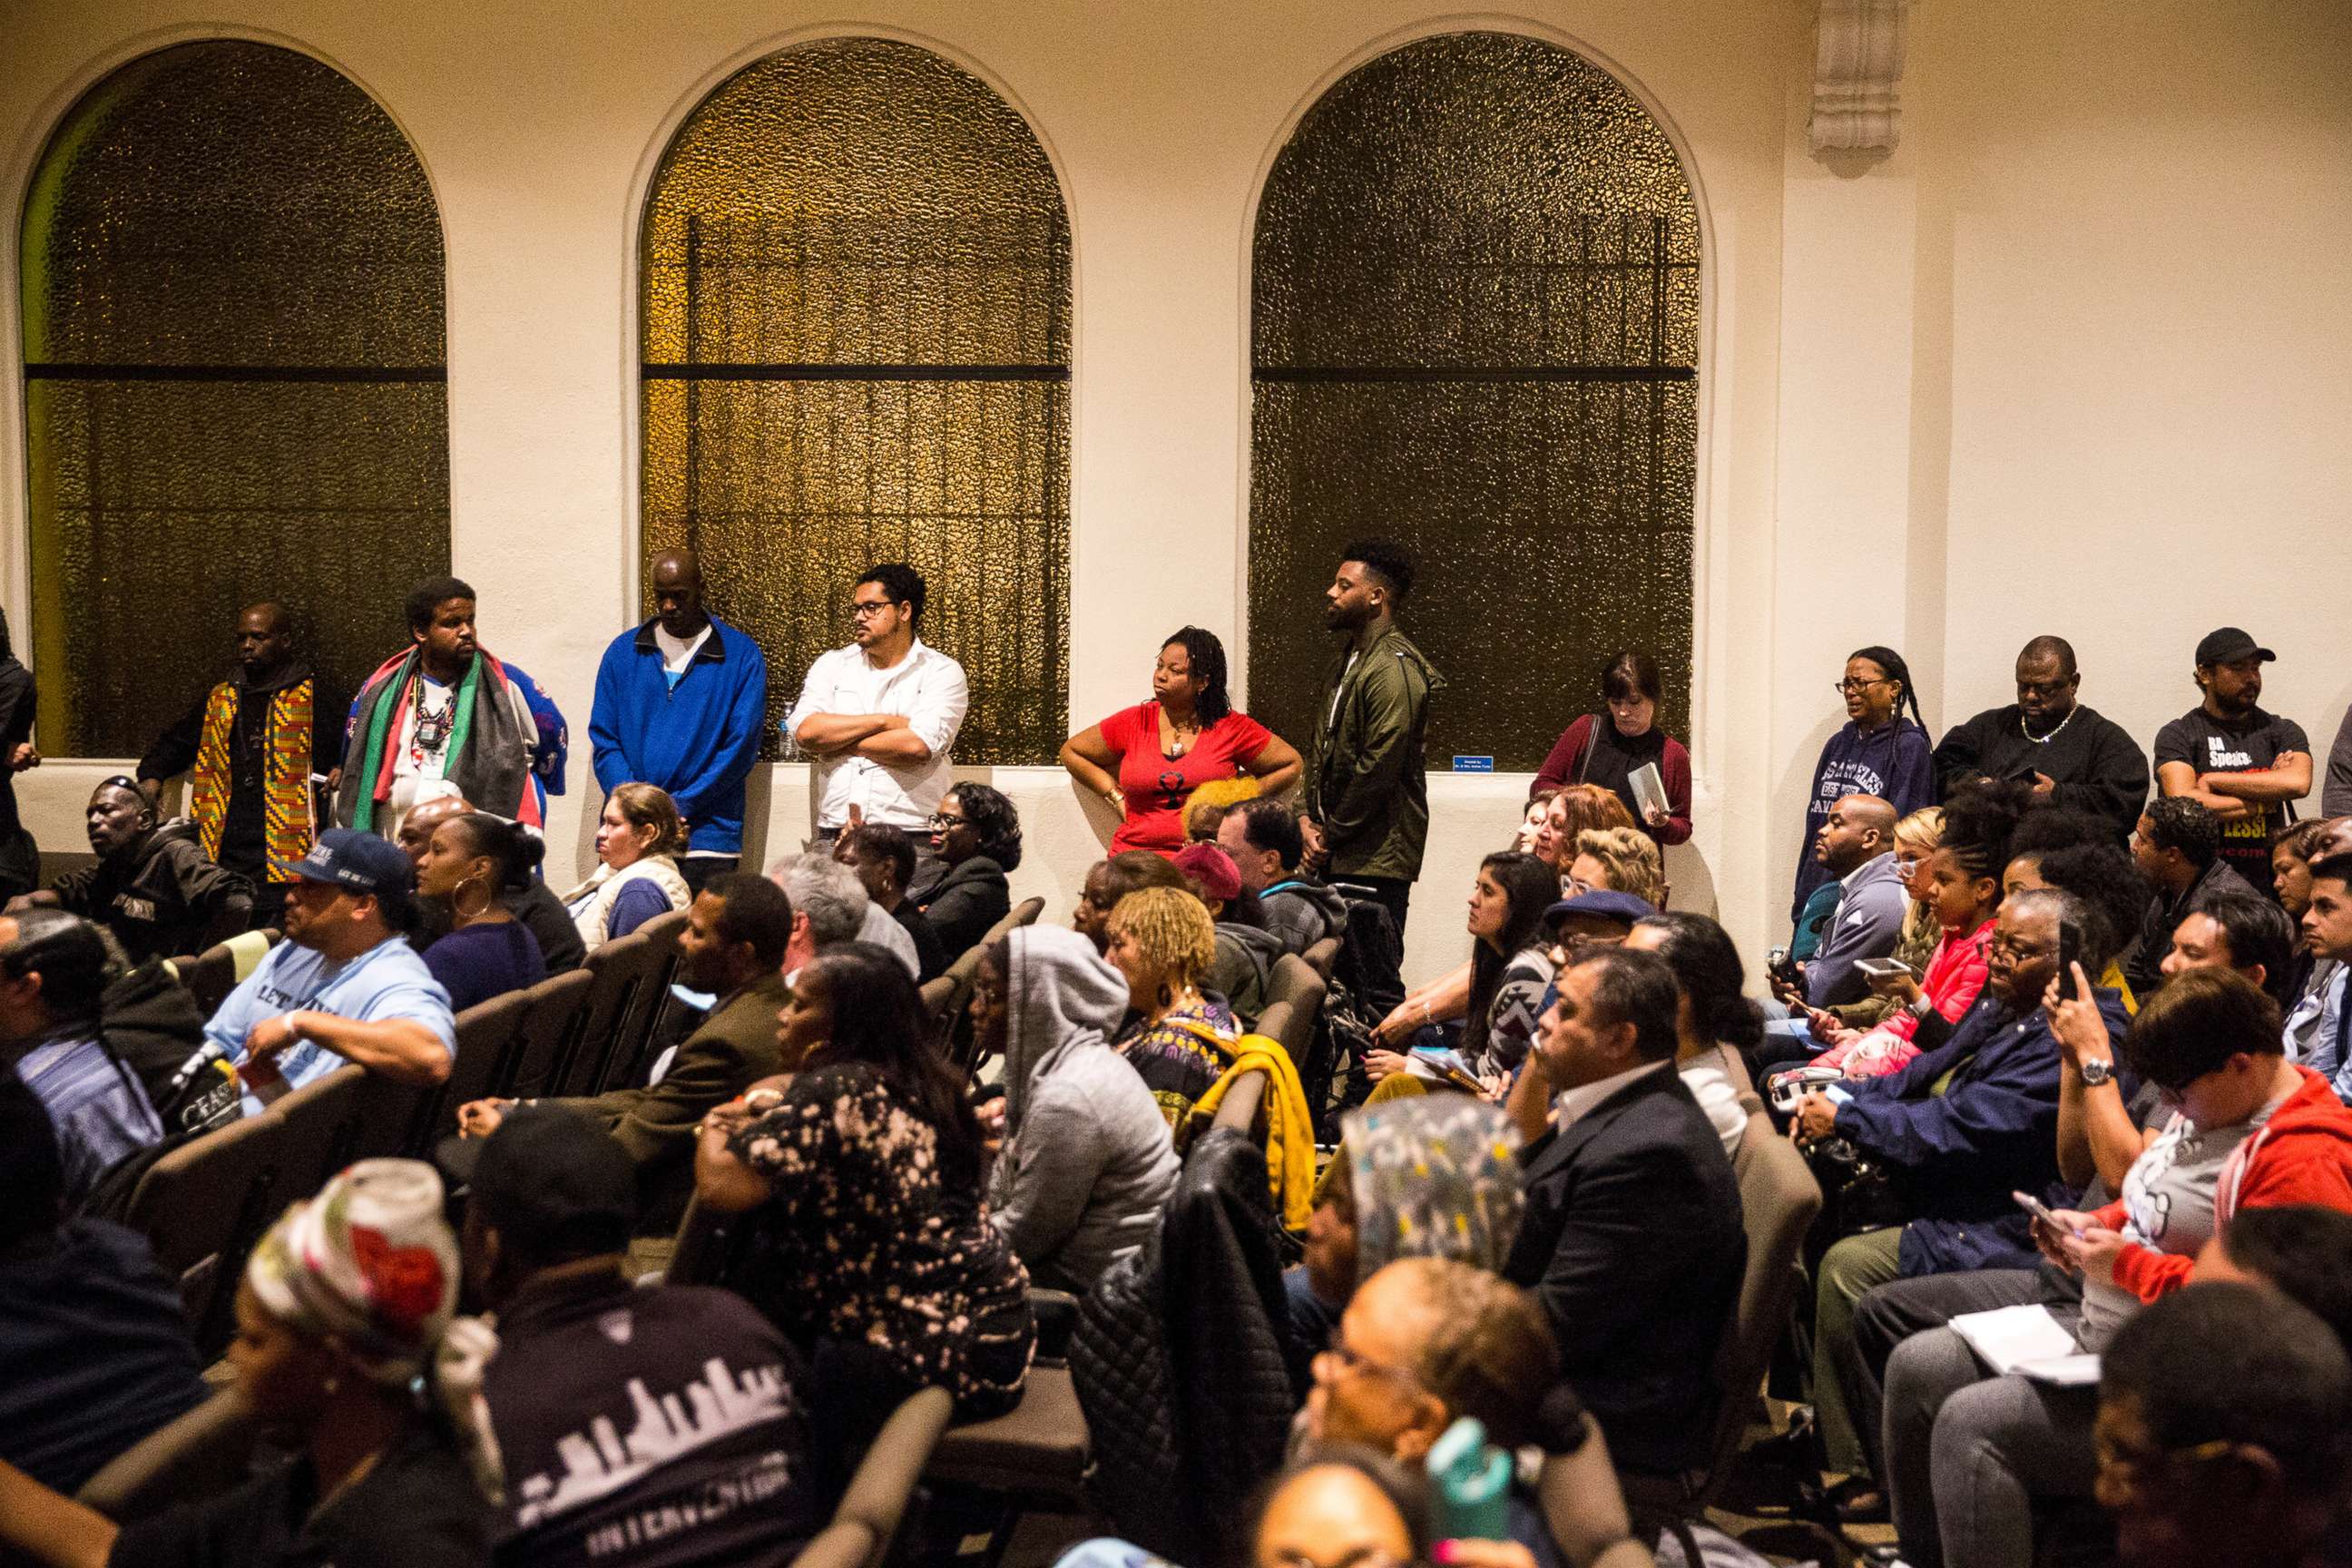 PHOTO: A large crowd fills the room for an emergency town hall meeting to discuss a shooting that led to the death of a 16 year old boy, at the New Congregational Missionary Baptist Church on Feb. 07, 2018, in Los Angeles.